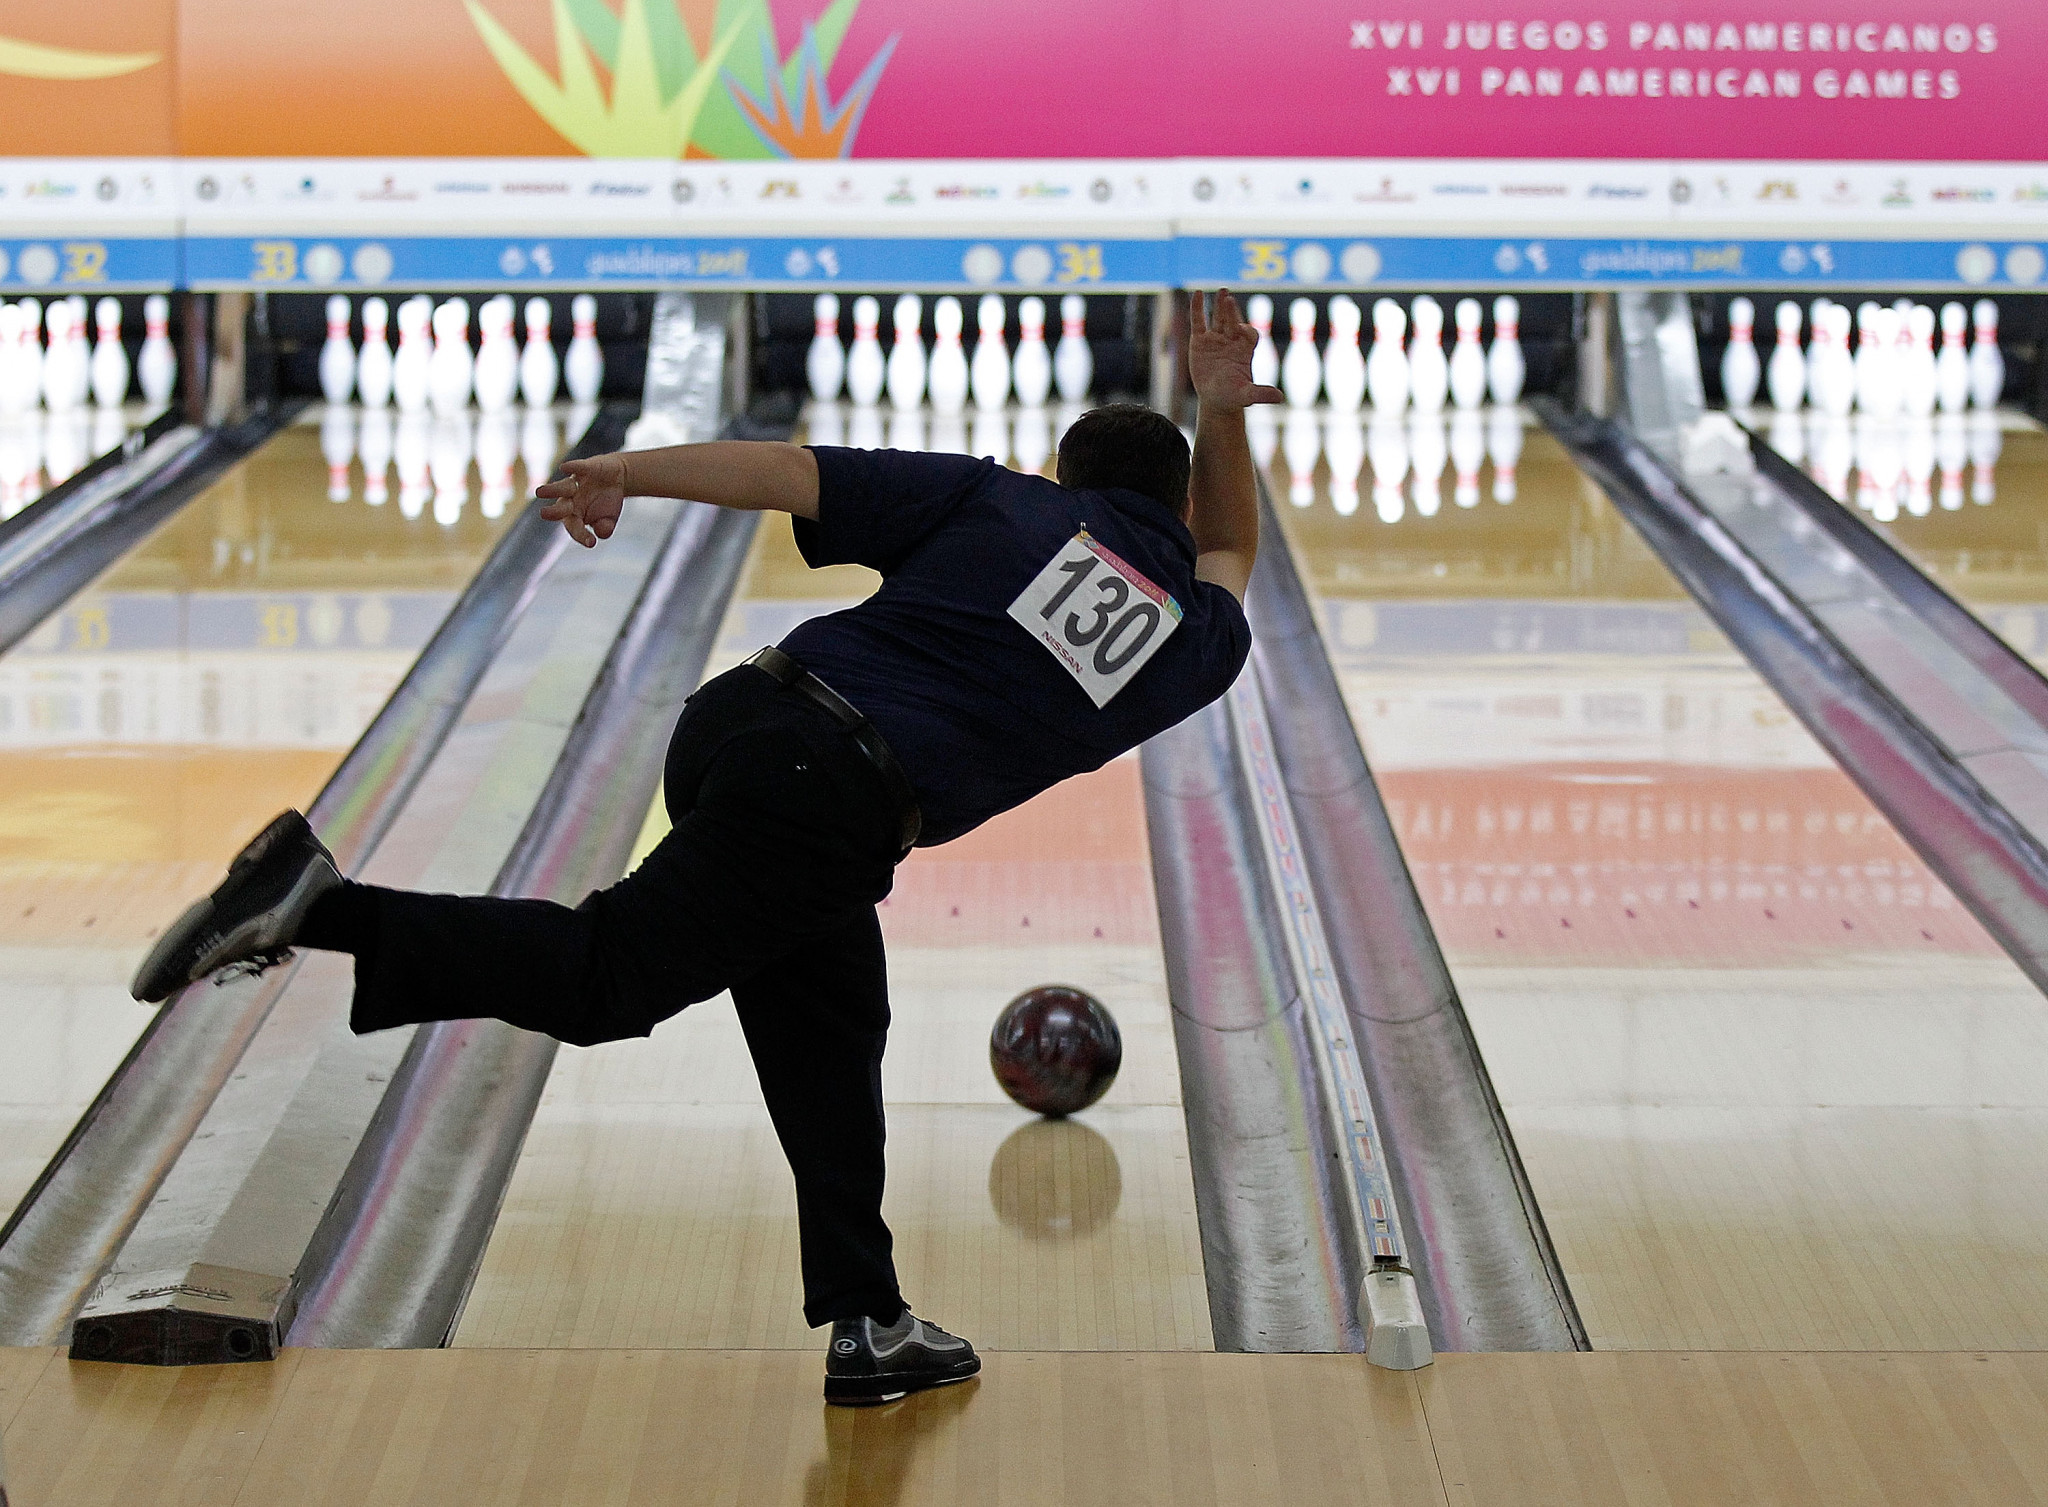 Bowling has featured on the Pan American Games sports programme since 1991 ©Getty Images